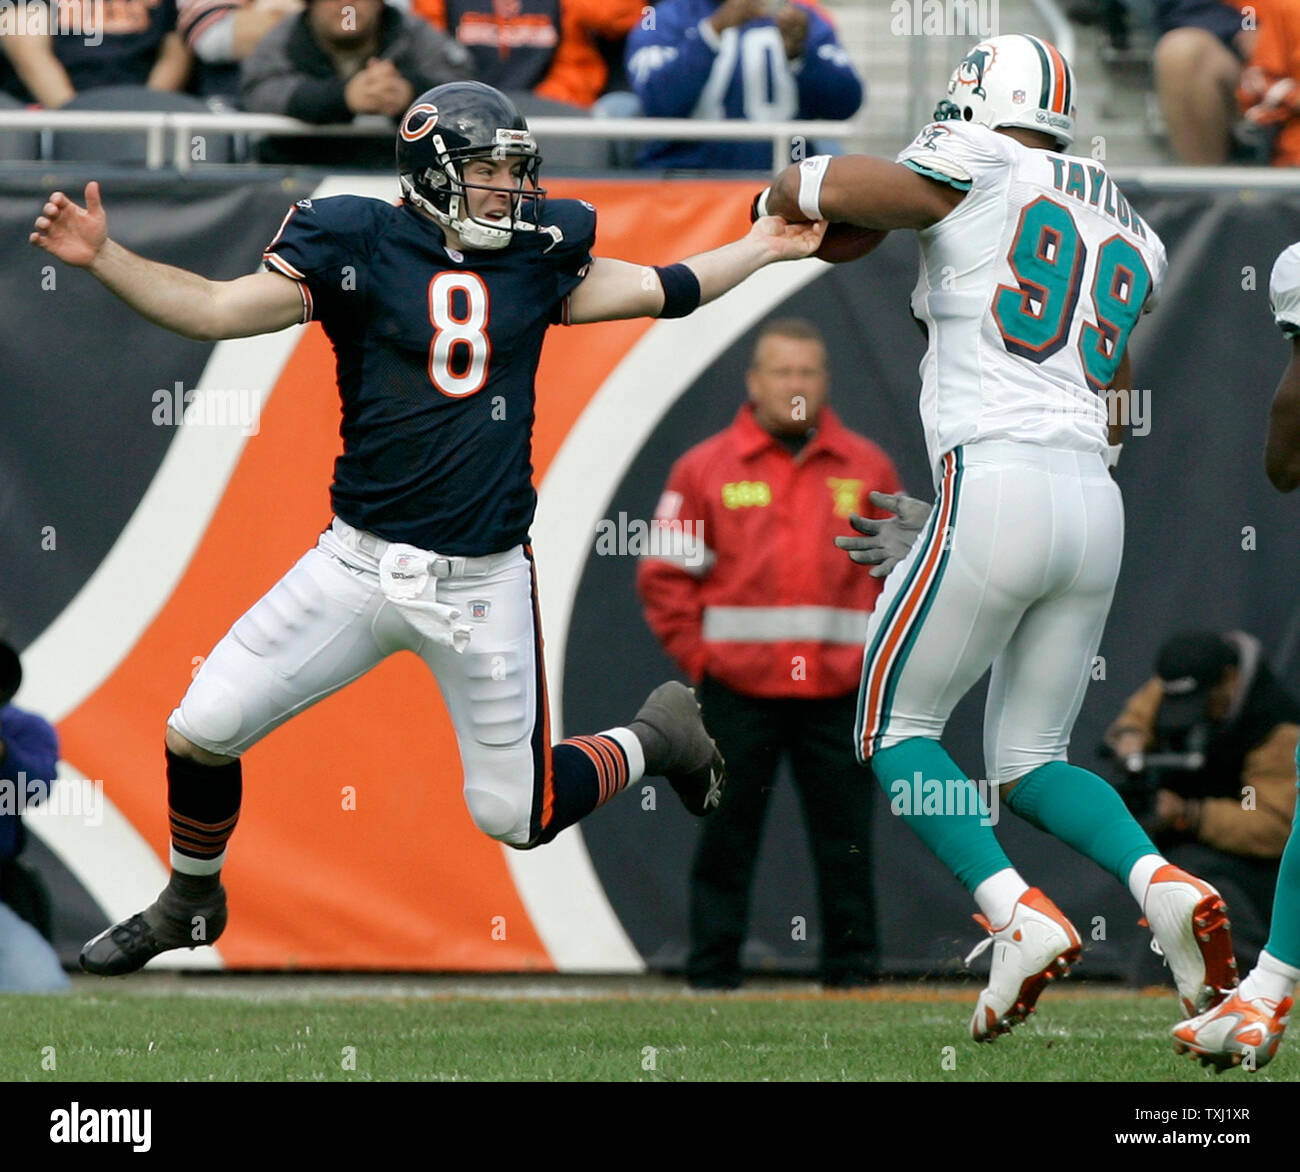 miami-dolphins-defensive-end-jason-taylor-99-eludes-chicago-bears-quarterback-rex-grossman-8-after-grossmans-pass-was-intercepted-by-taylor-during-the-second-quarter-at-soldier-field-in-chicago-on-november-5-2006-taylor-returned-the-interception-for-20-yards-and-a-touchdown-upi-photobrian-kersey-TXJ1XR.jpg